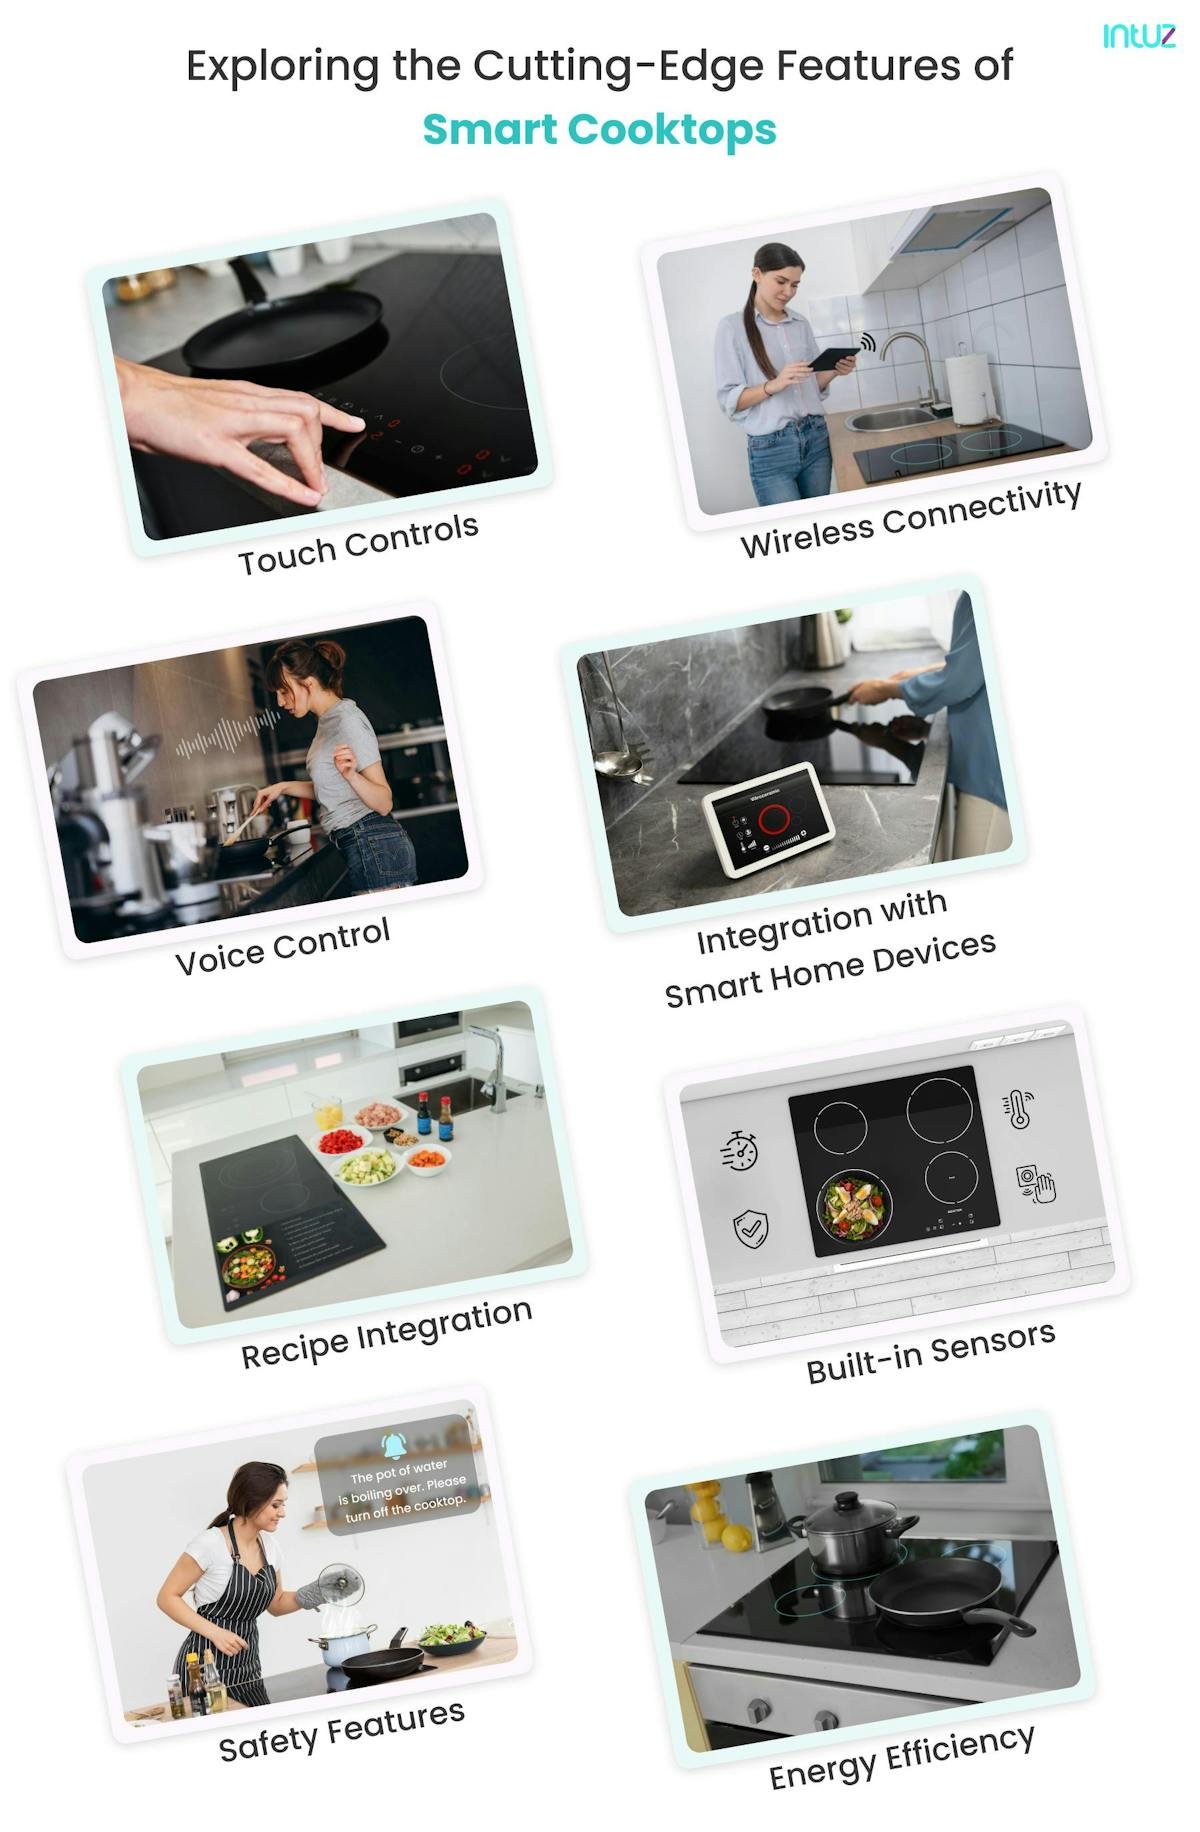 Cutting-Edge Features of Smart Cooktops